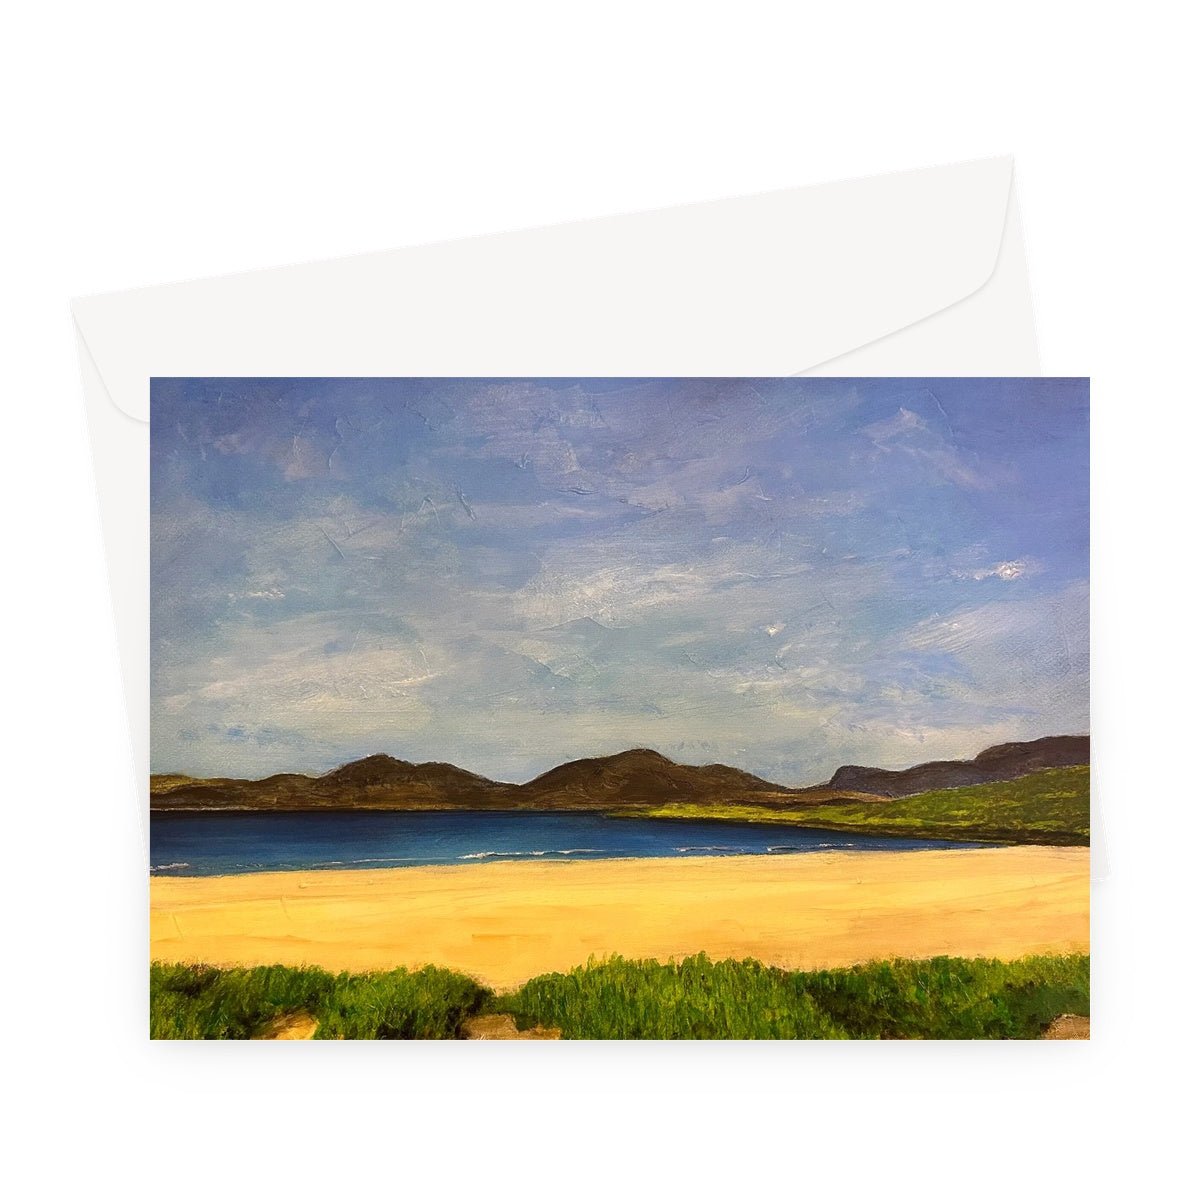 Luskentyre Beach Harris Art Gifts Greeting Card-Greetings Cards-Hebridean Islands Art Gallery-A5 Landscape-10 Cards-Paintings, Prints, Homeware, Art Gifts From Scotland By Scottish Artist Kevin Hunter